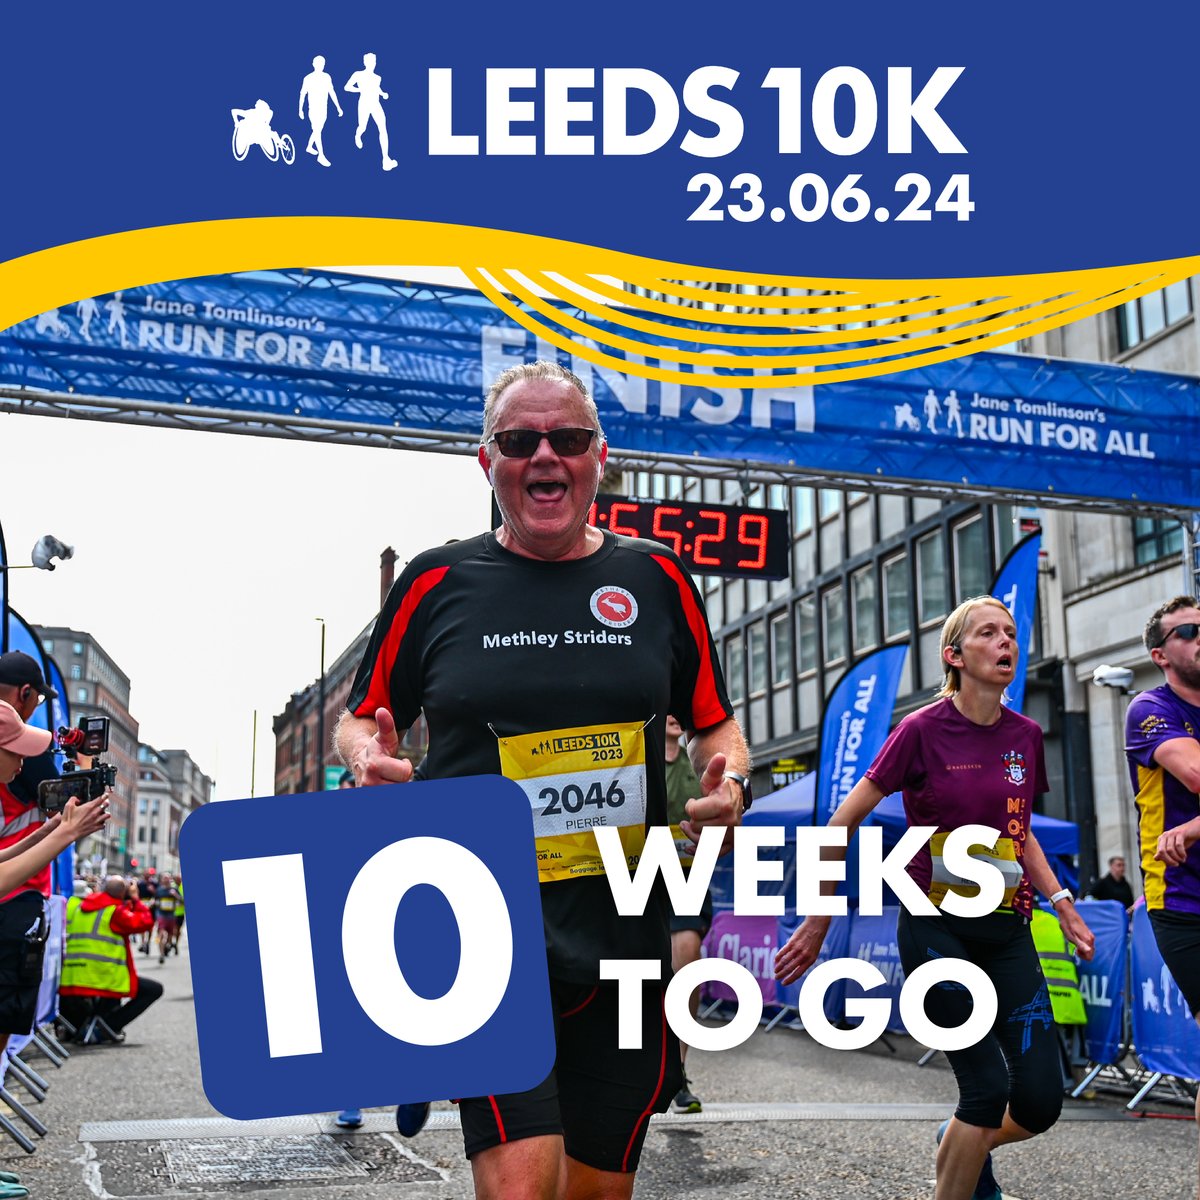 The weeks are counting down to the Leeds 10K📅 Thinking of signing up? There is still time to get your name in and get the training in🏃 #runforall #leeds10k #leeds #10krace #10kevent